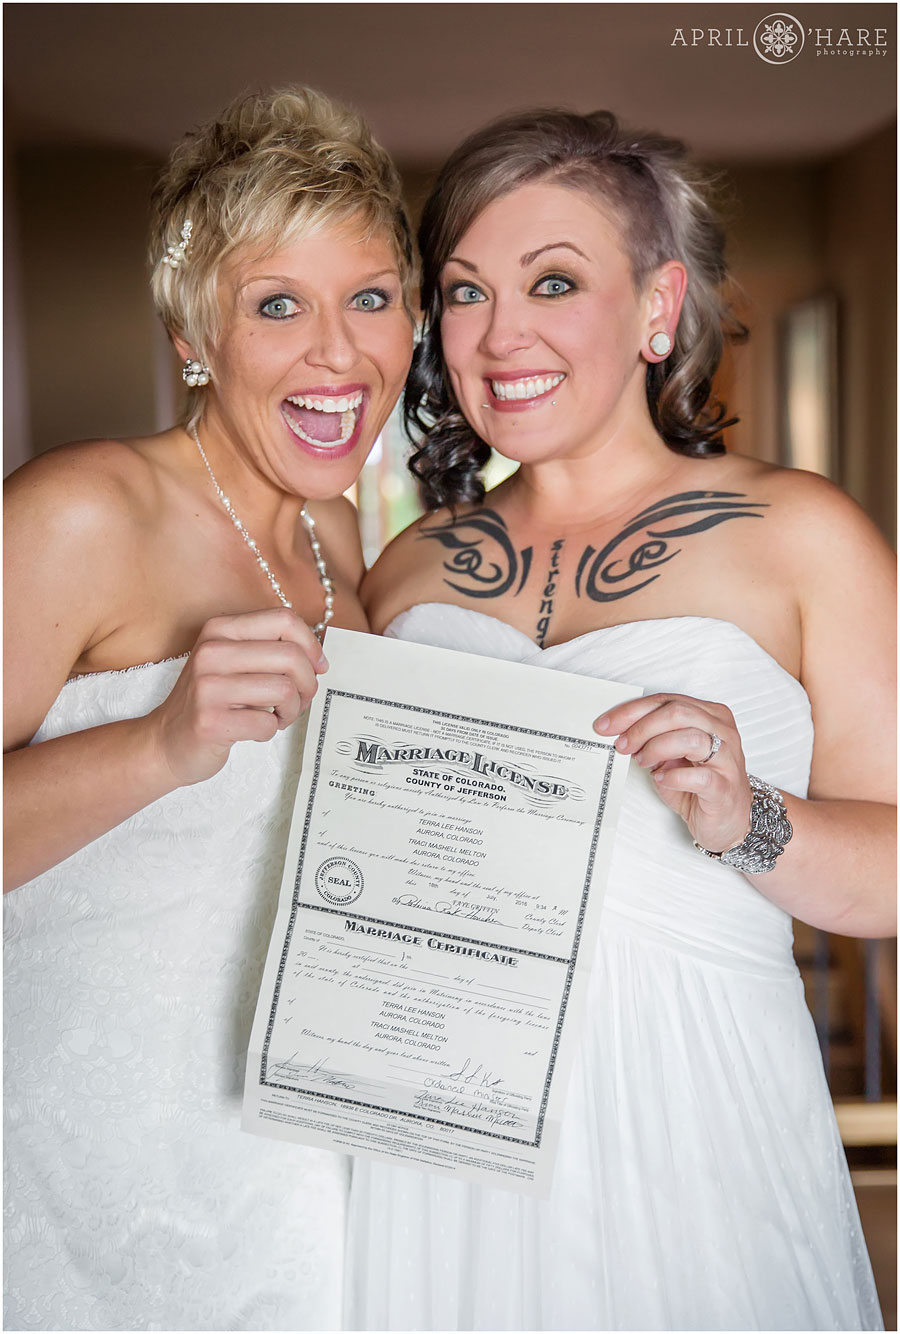 Adorable photo of two excited brides holding their marriage license at their Backyard Lesbian Wedding